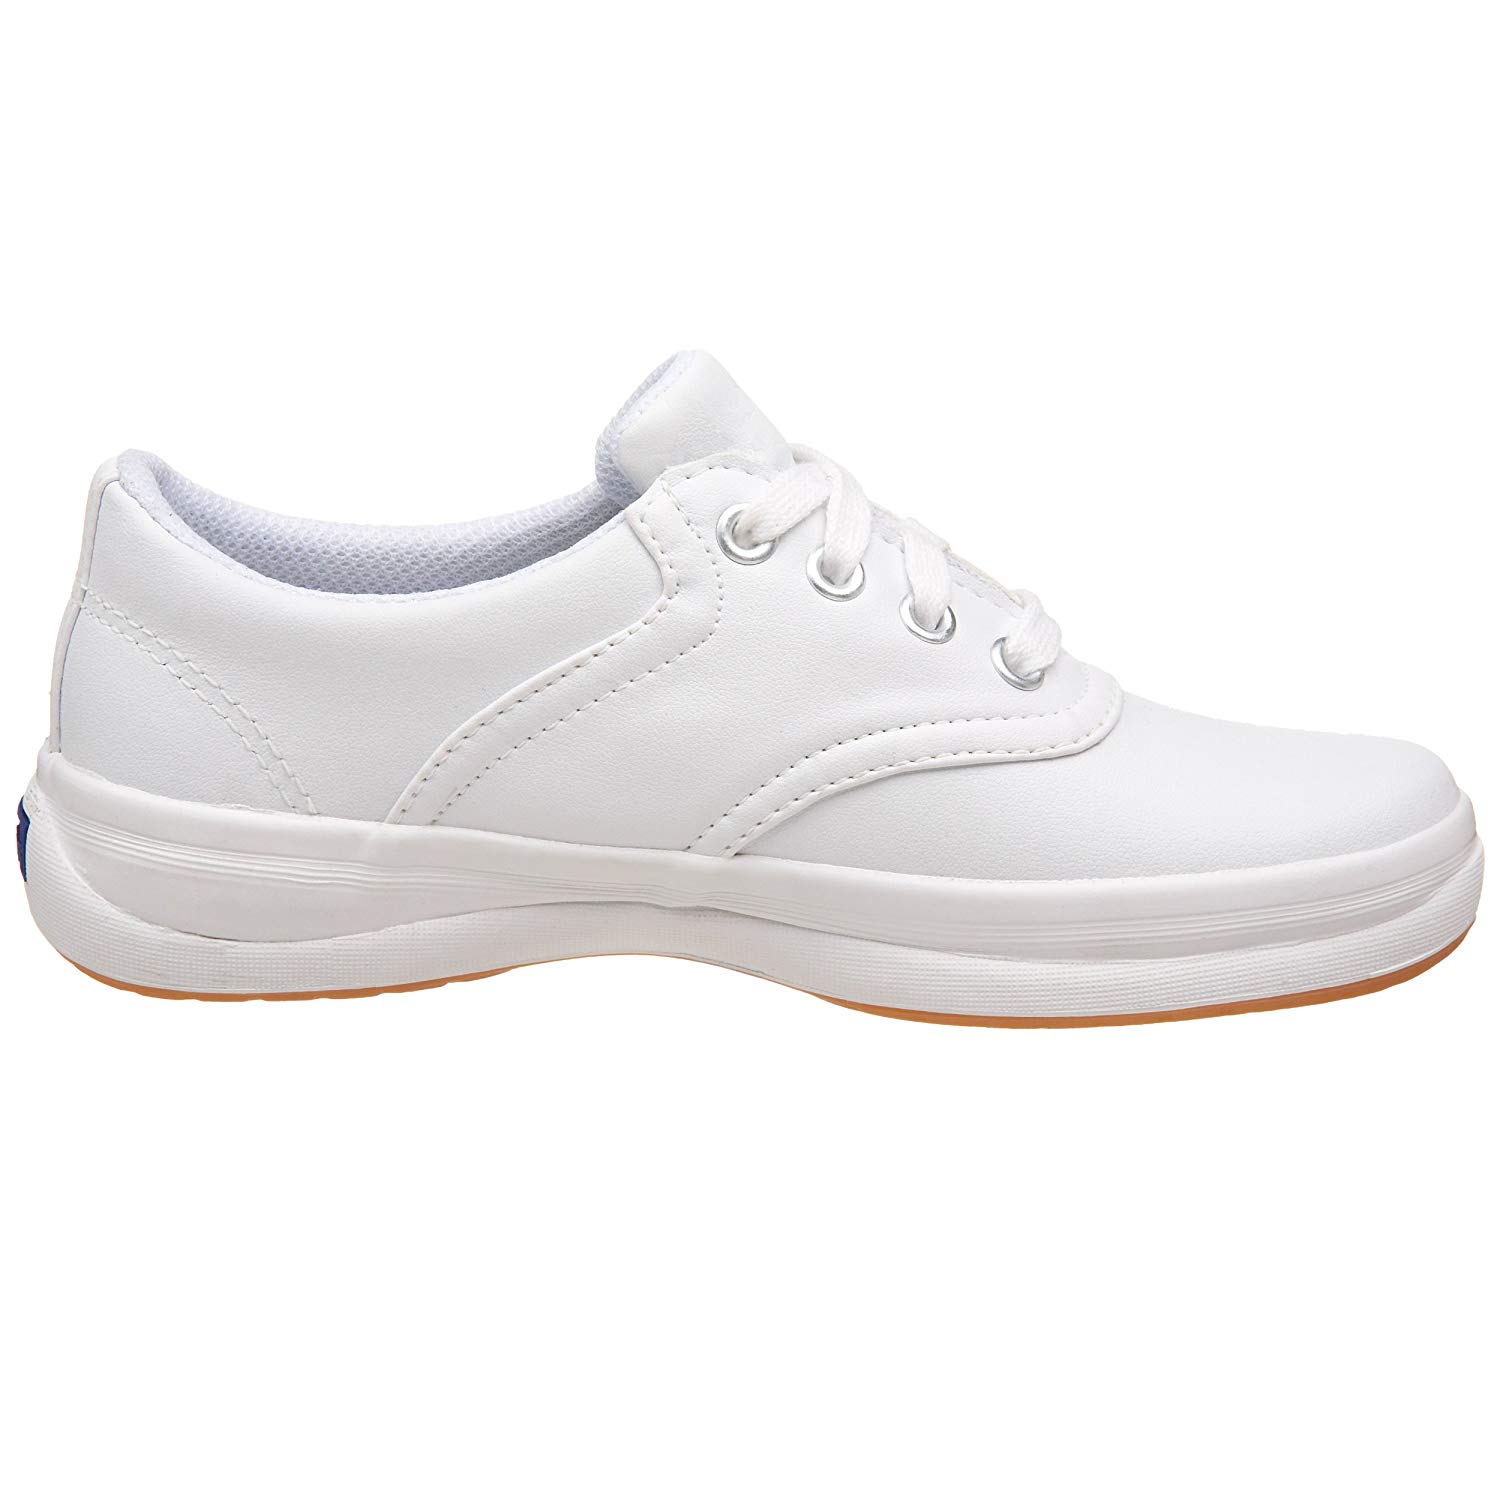 Keds Boys school days 11 Leather Low Top Lace Up, White, Size Big Kid 5 ...